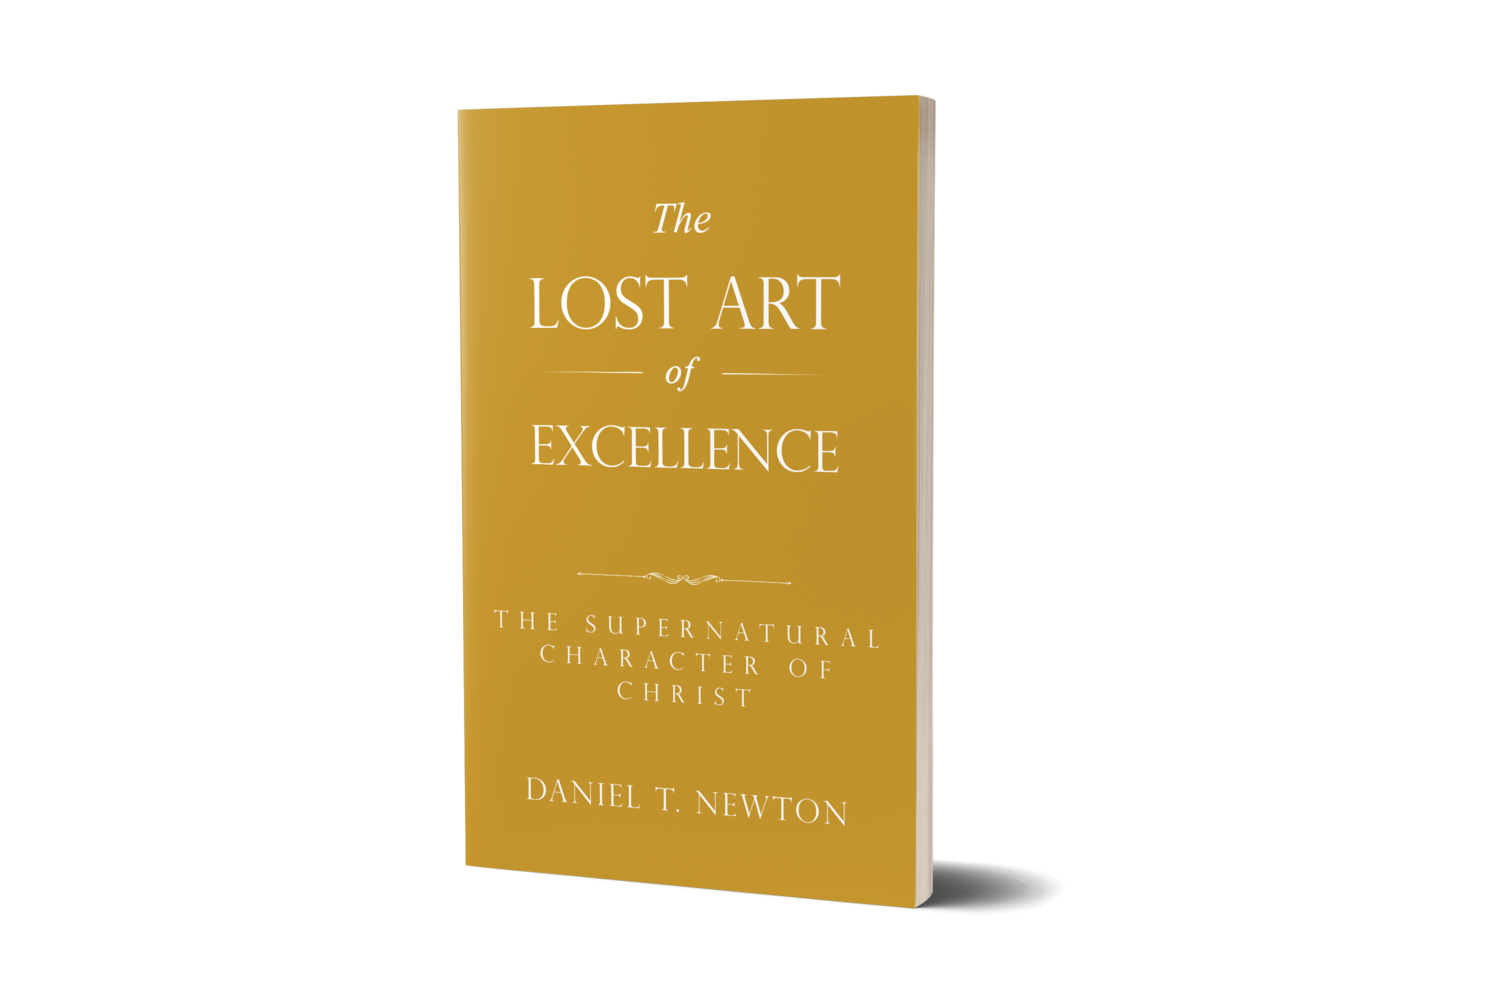 The Lost Art of Excellence